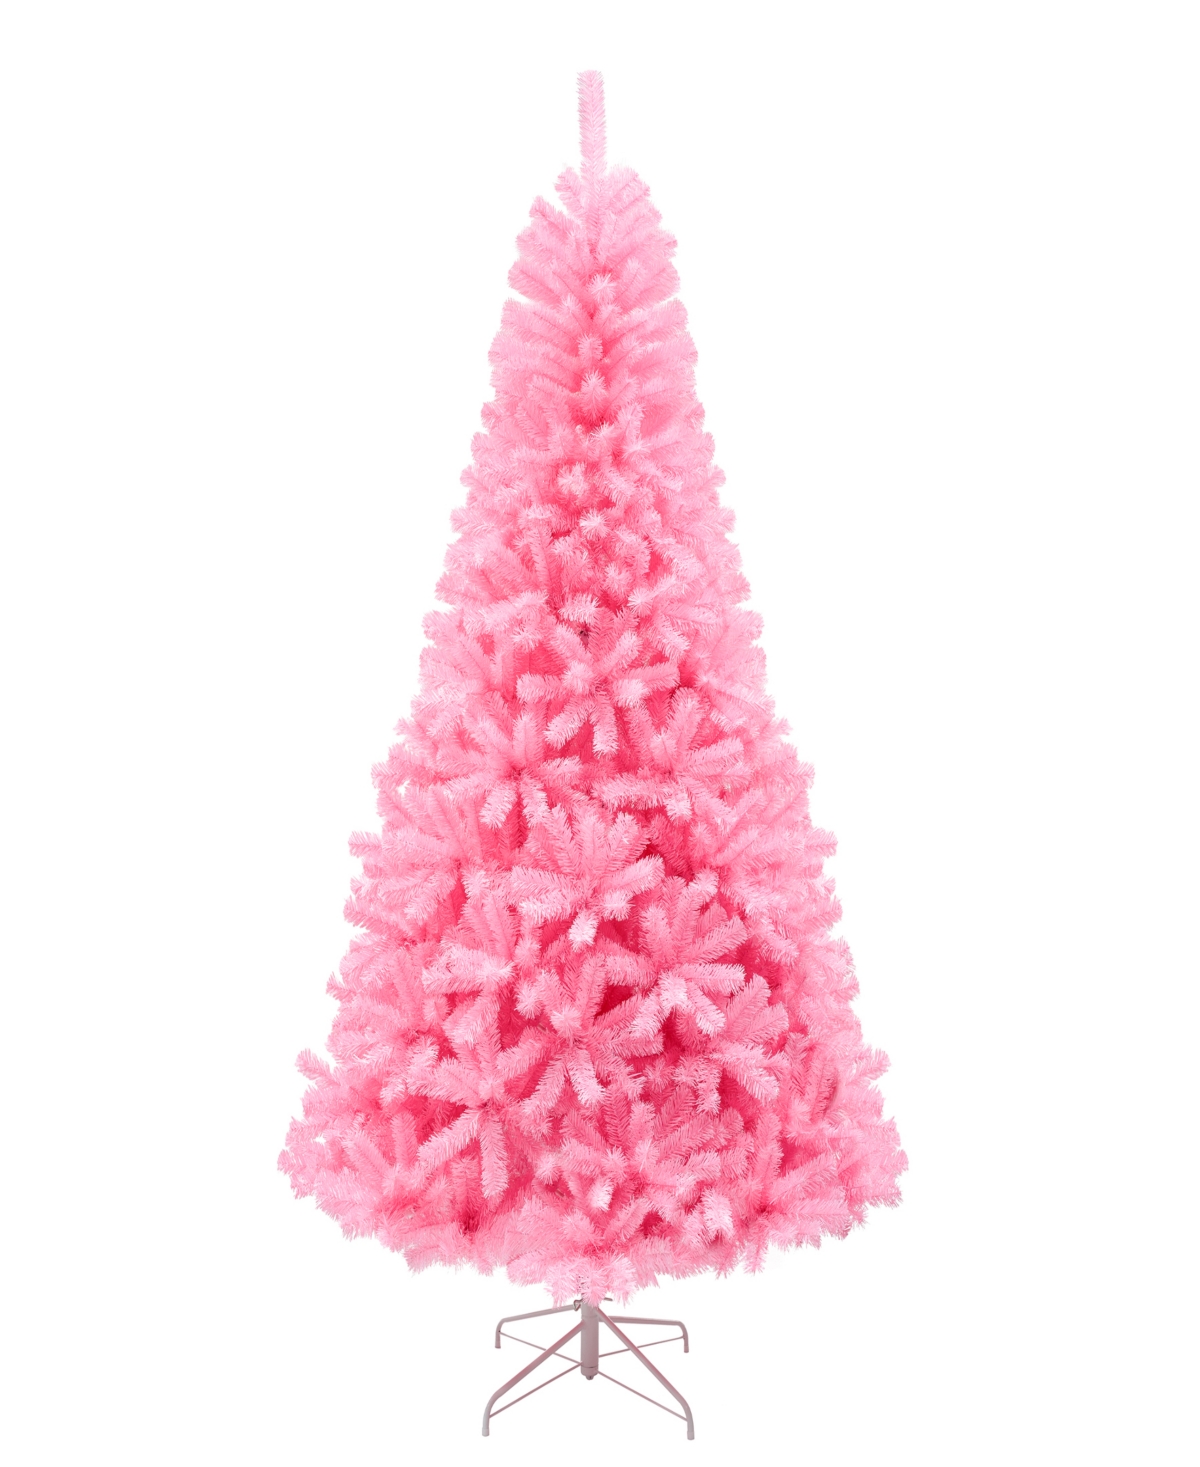 First Traditions 7.5' Color Pop Tree - Pink